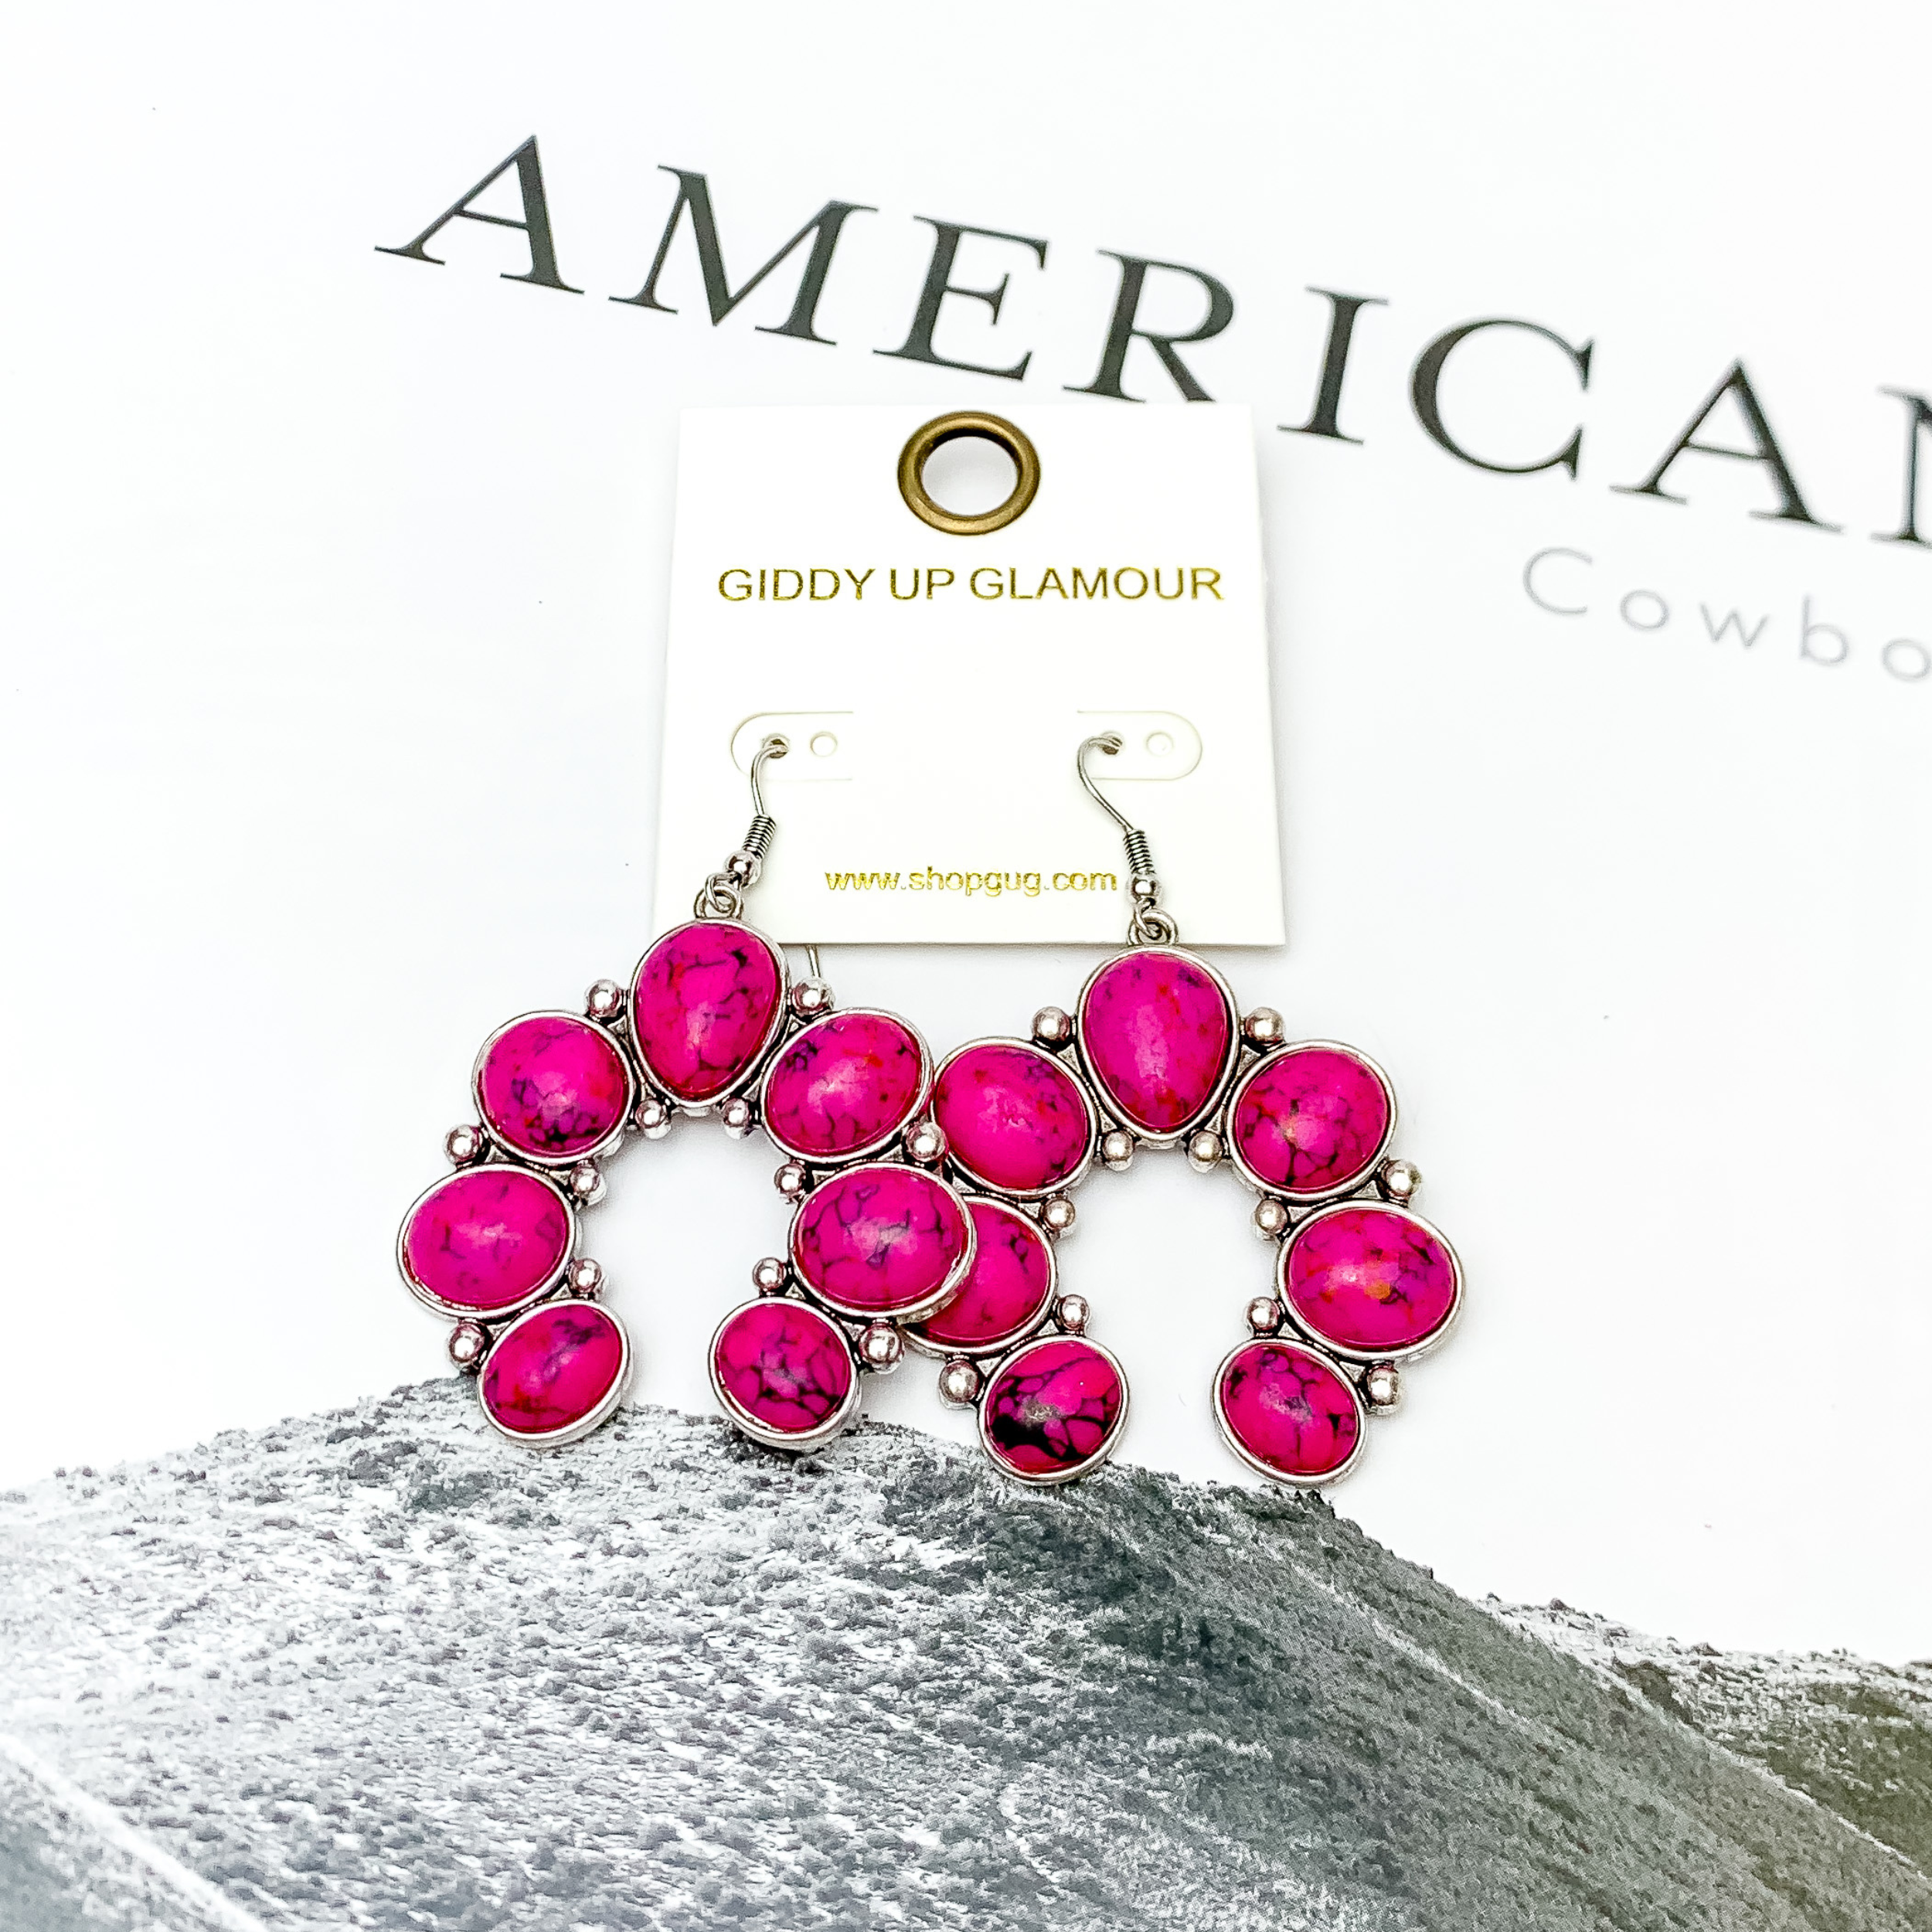 Squash Blossom Stone Earrings In Hot Pink. Pictured on a white background with American cowboy written in the background.